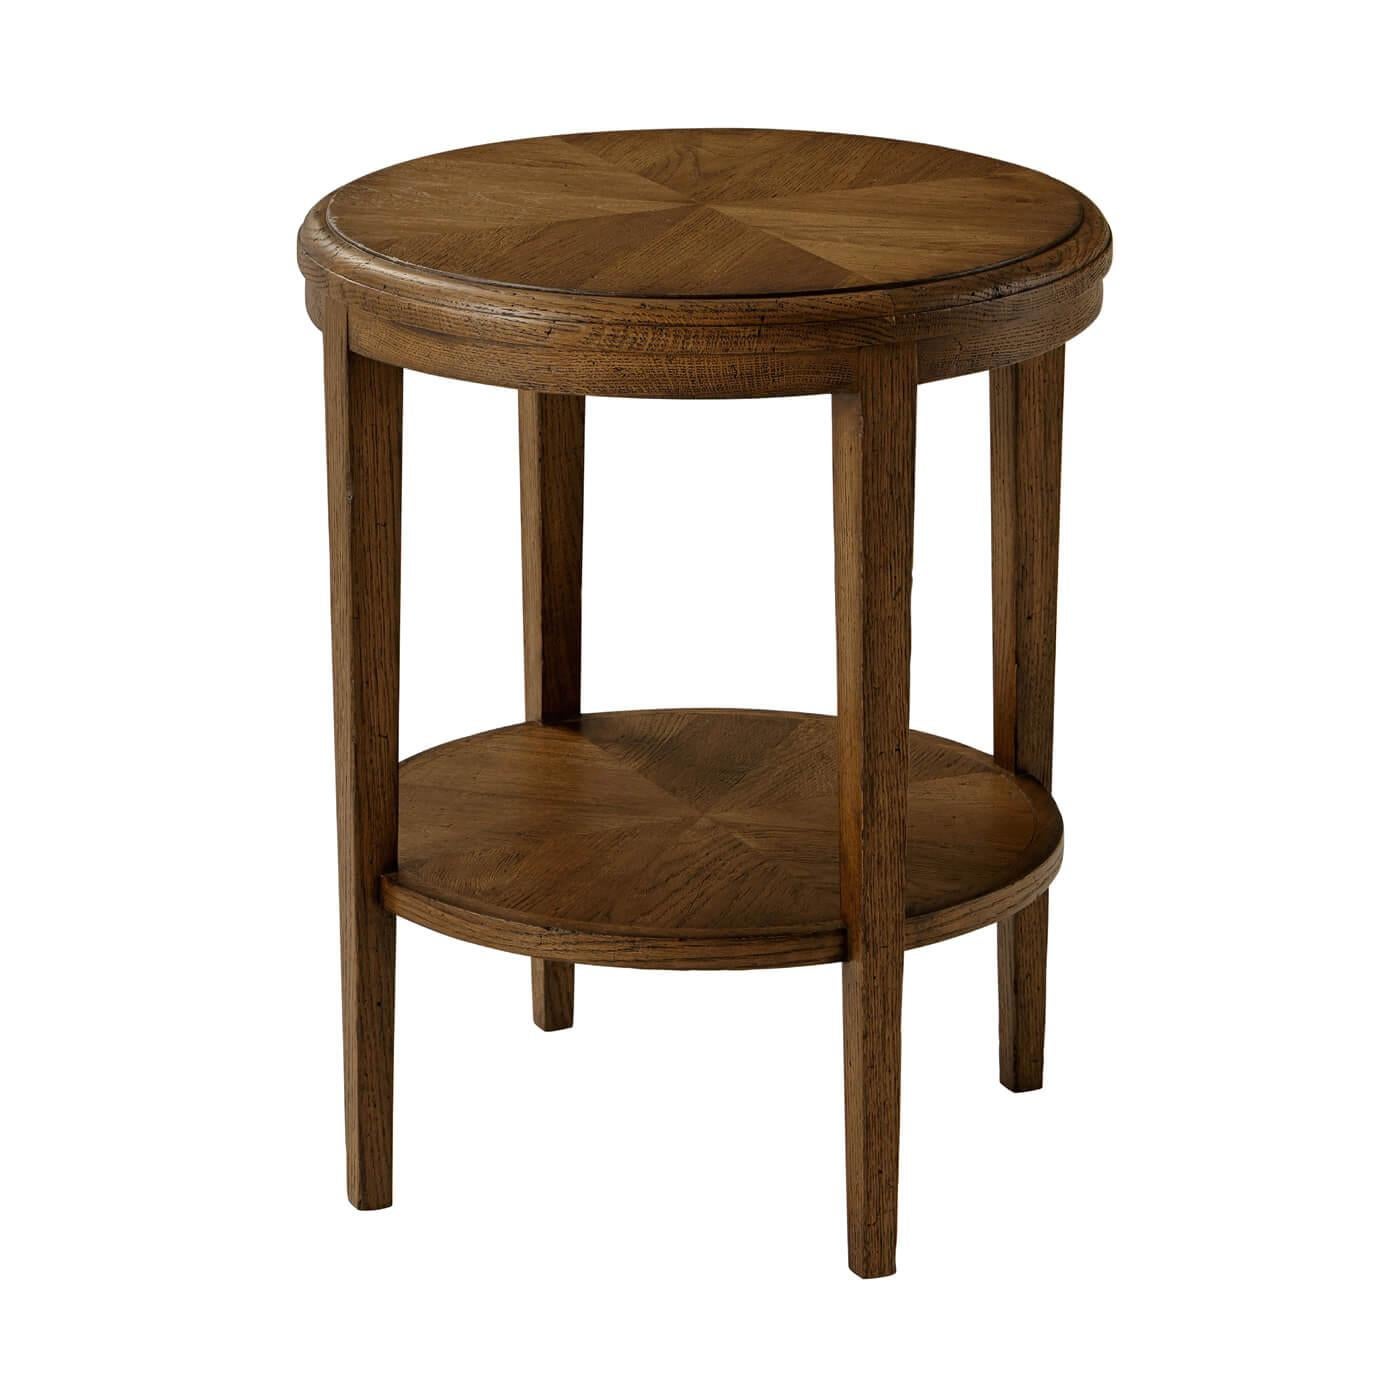 Oak Parquetry Round Side Table, Dark Oak In New Condition For Sale In Westwood, NJ